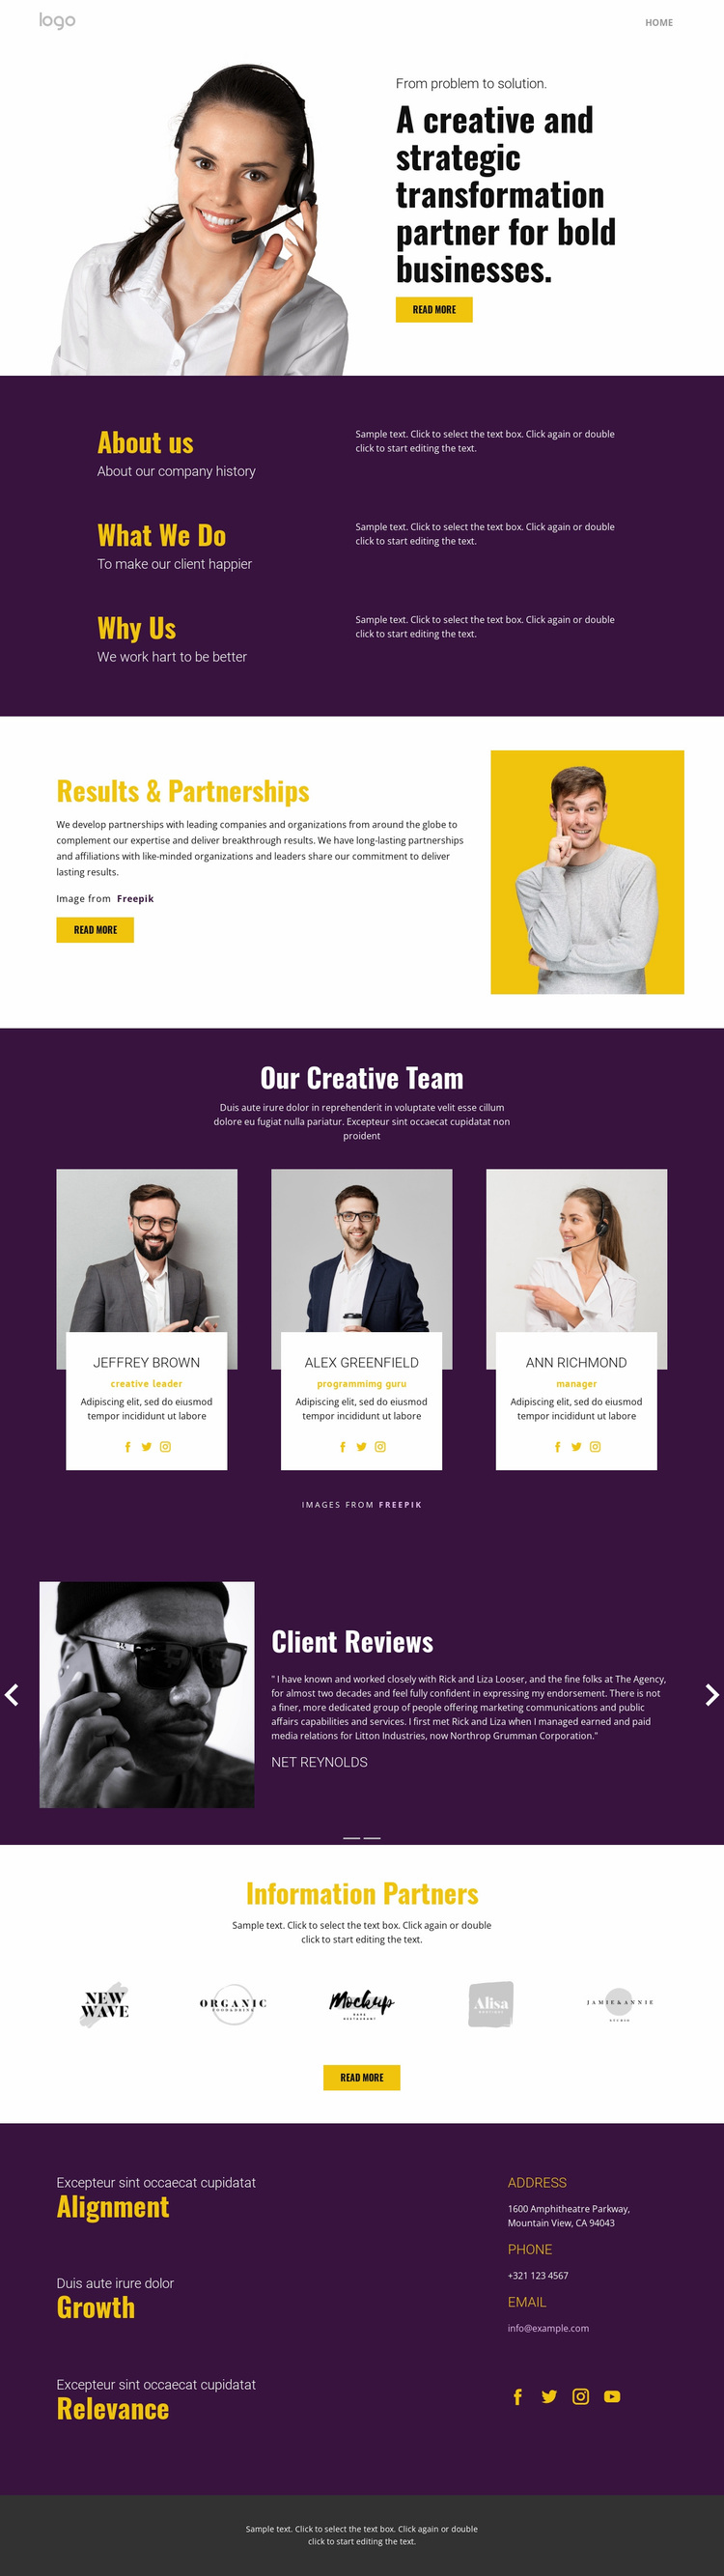 Creative strategy in business Website Design